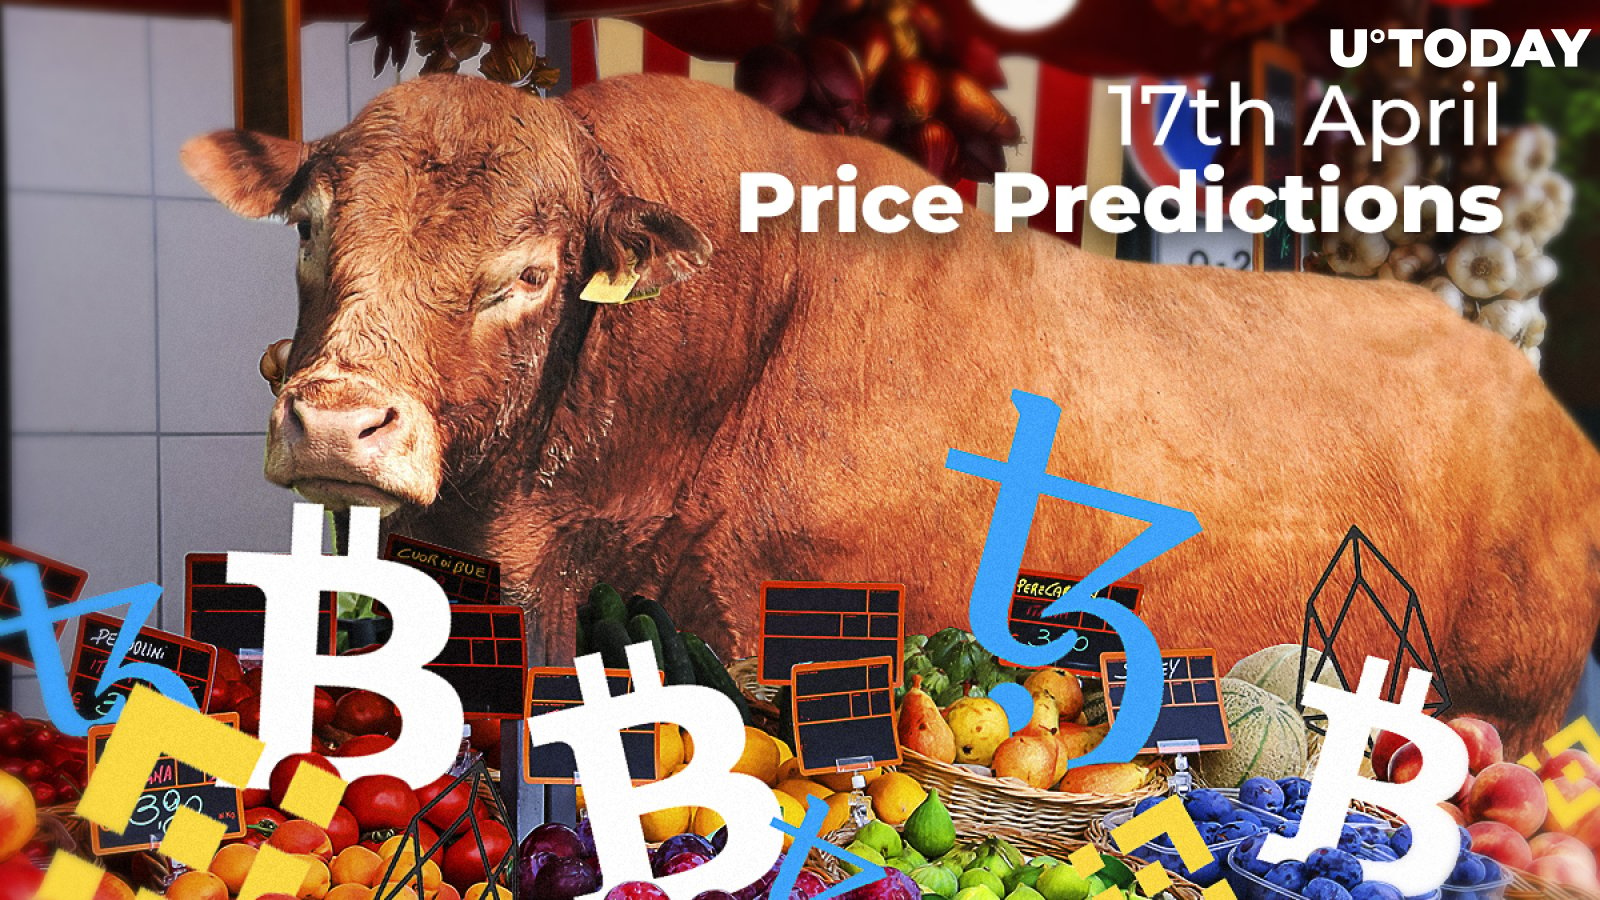 17th April Price Predictions: Bitcoin Cash (BCH), EOS, Binance Coin (BNB), Tezos  (XTZ) — Have Bulls Entered the Whole Market or Just Bitcoin and Ethereum?